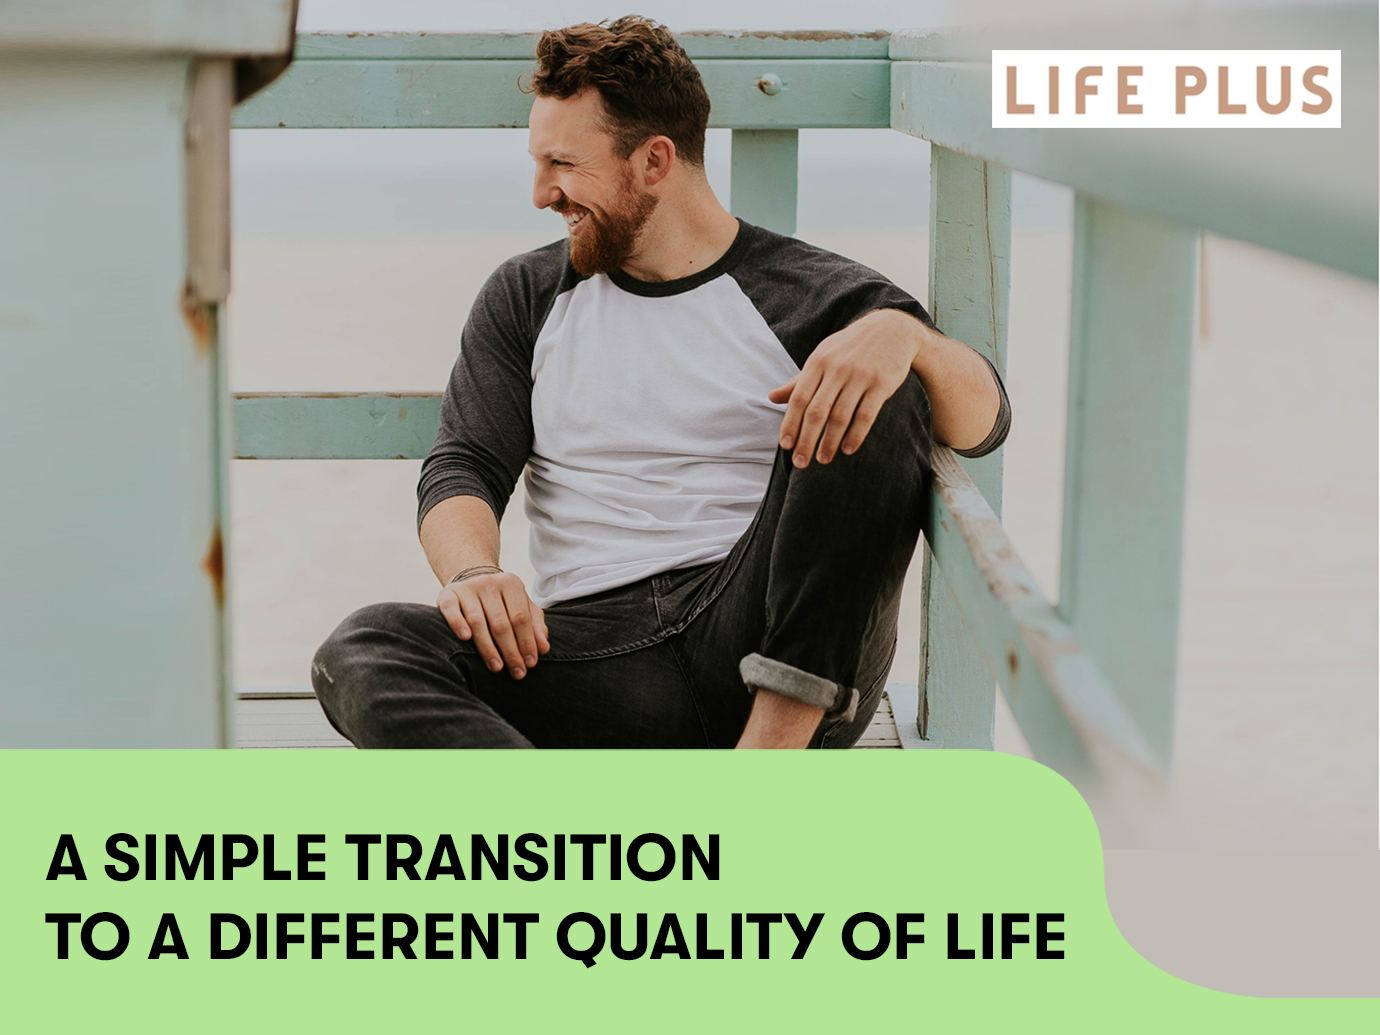 A simple transition to a different quality of life